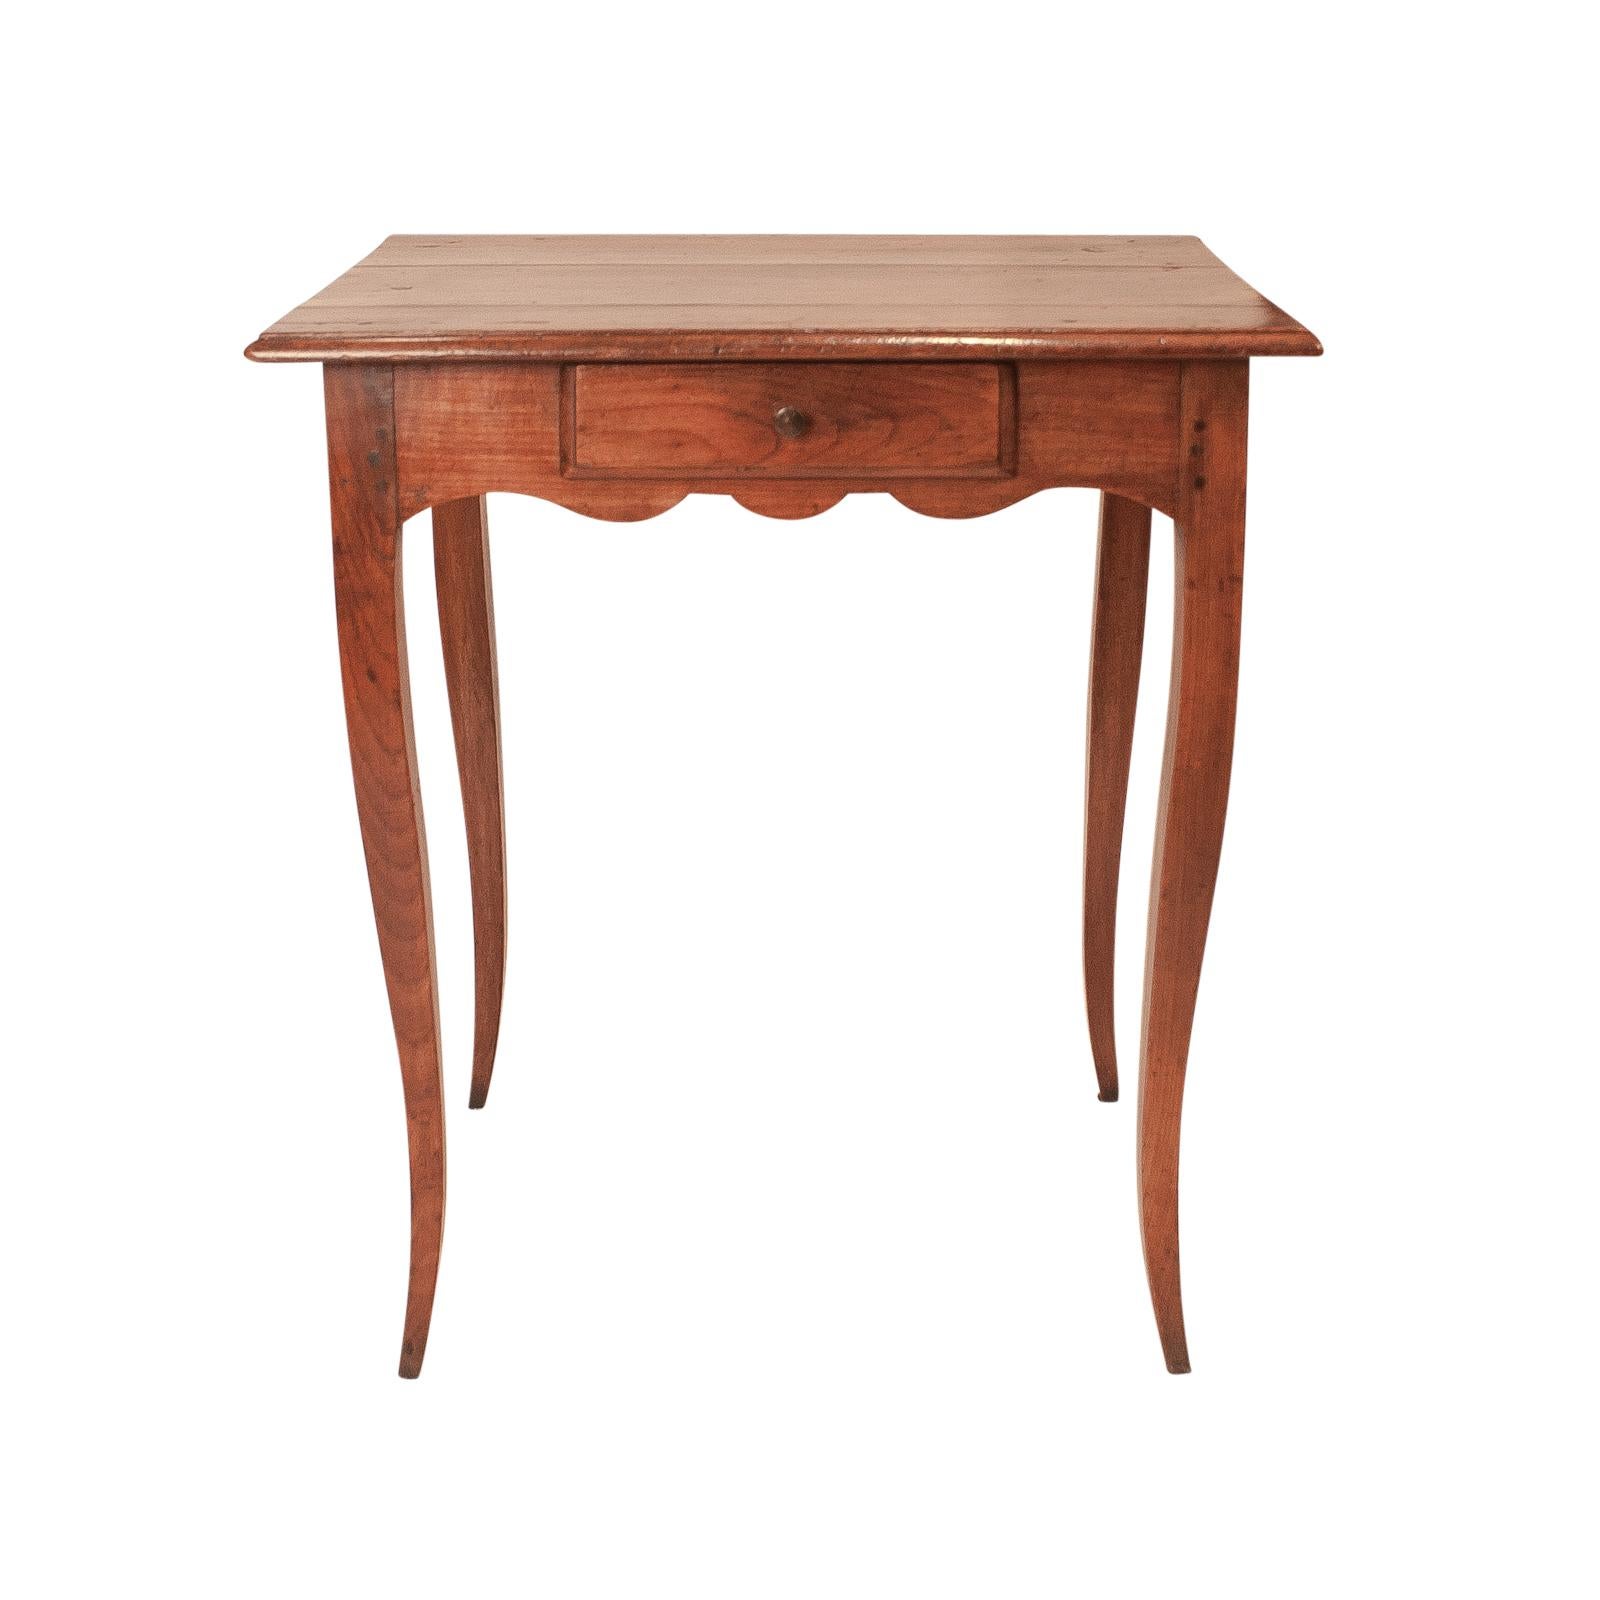 A mid-18th century French Louis XV period Provincial cherry one drawer writing table, circa 1760.